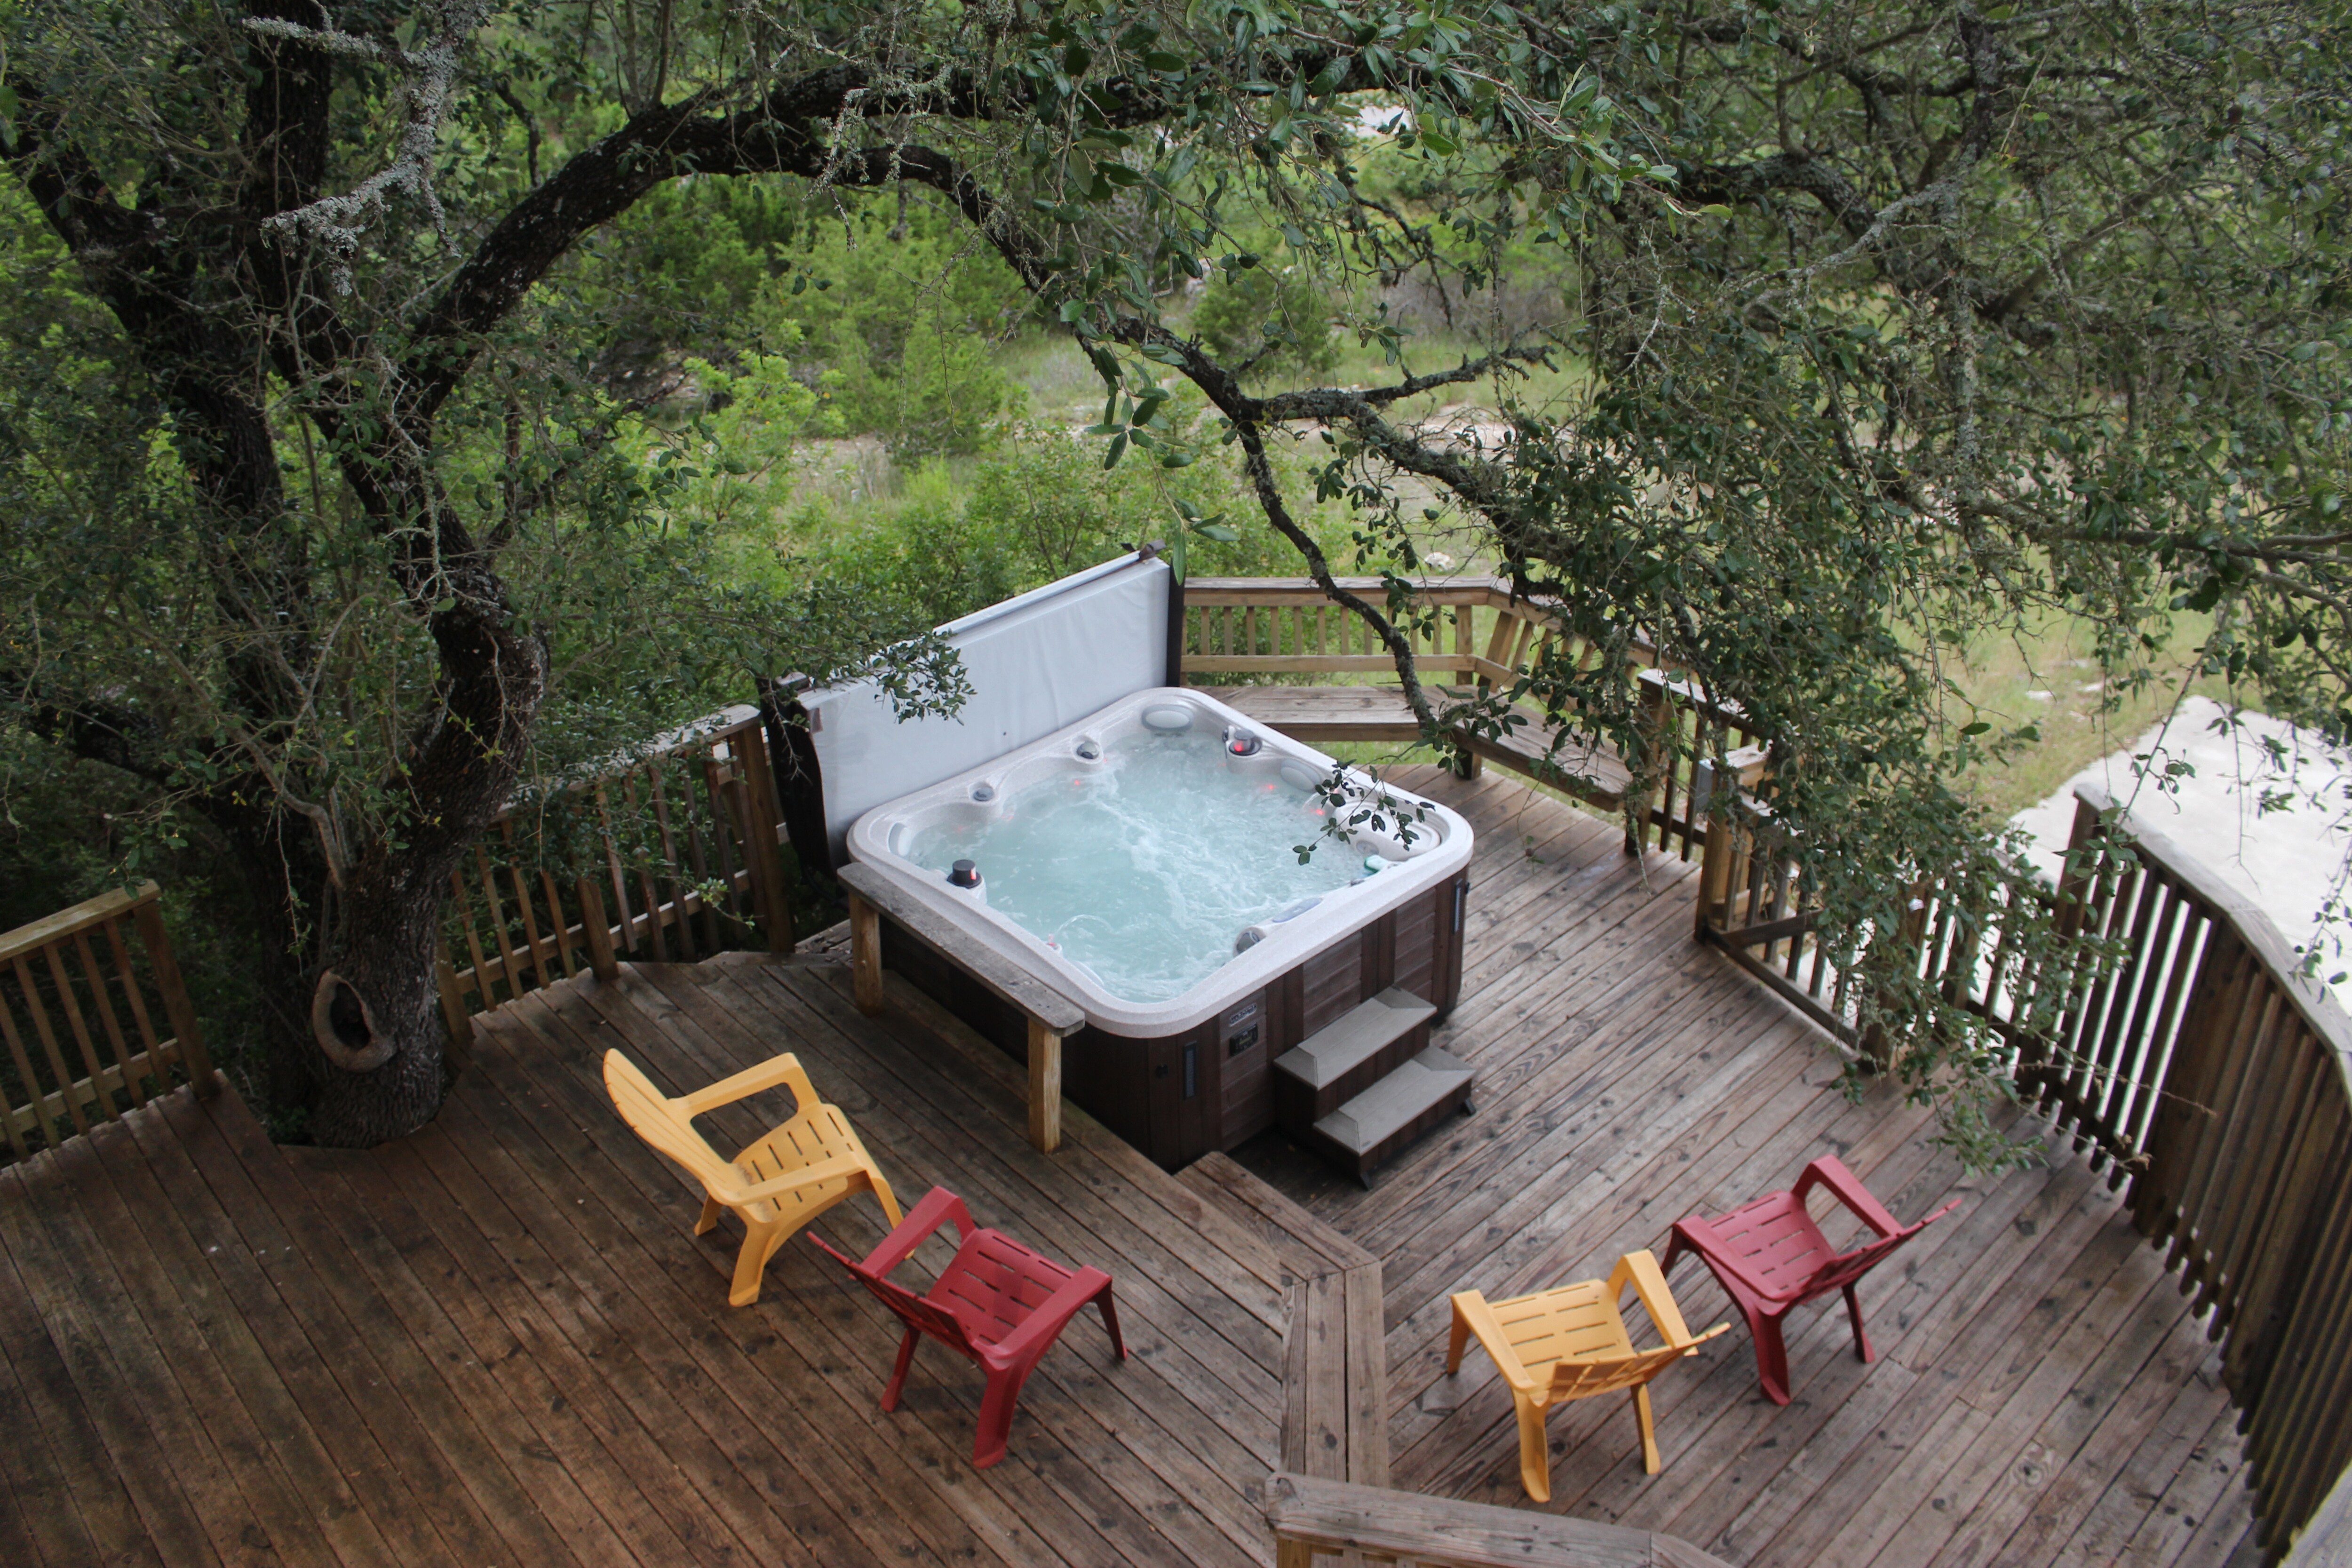 Relax and unwind in this fabulous hot tub!